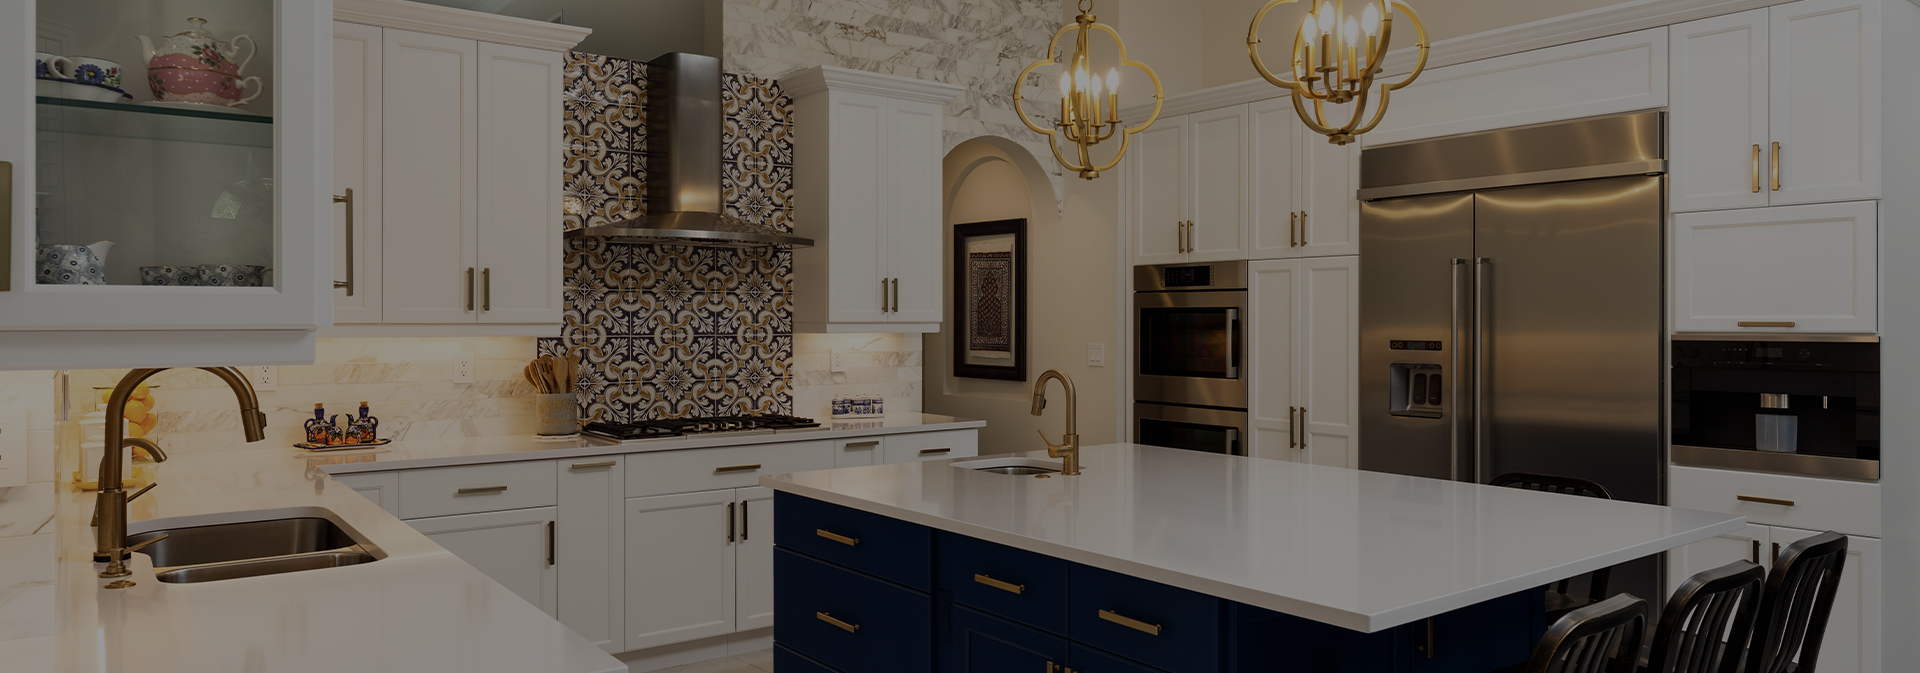 Kitchen redesign with white marble and white cabinets and dark painted island